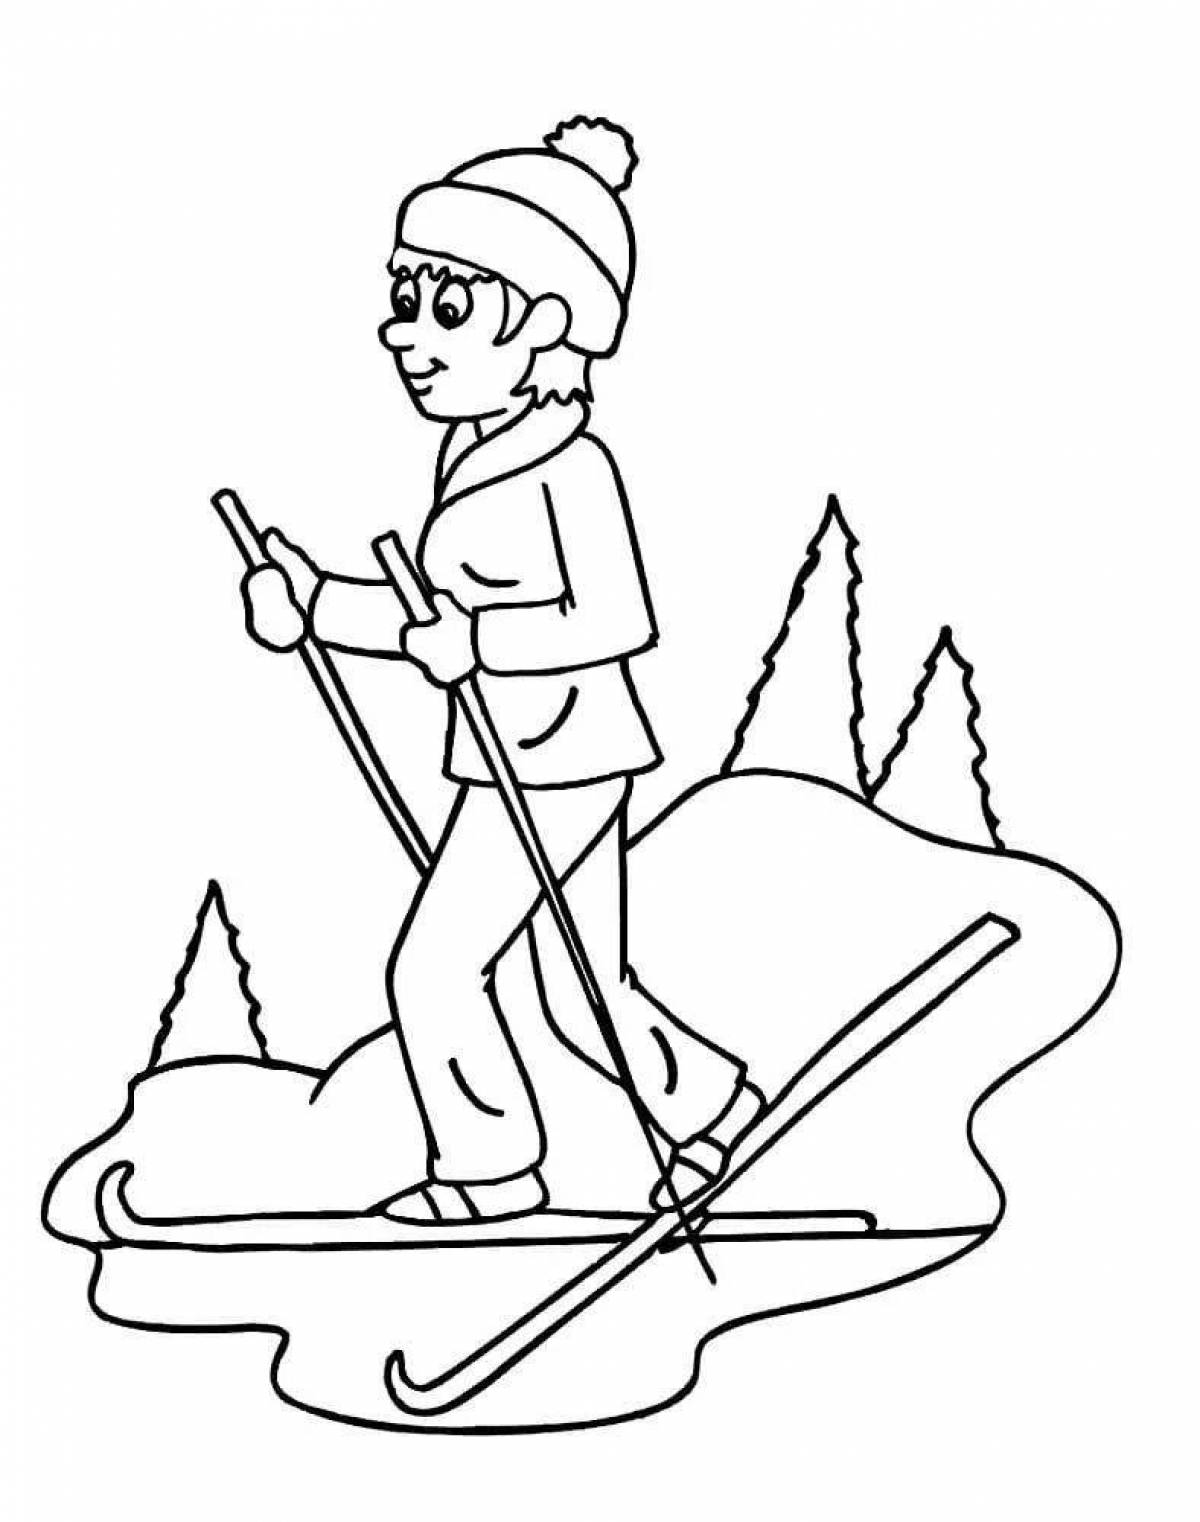 Coloring page brave boy on skis